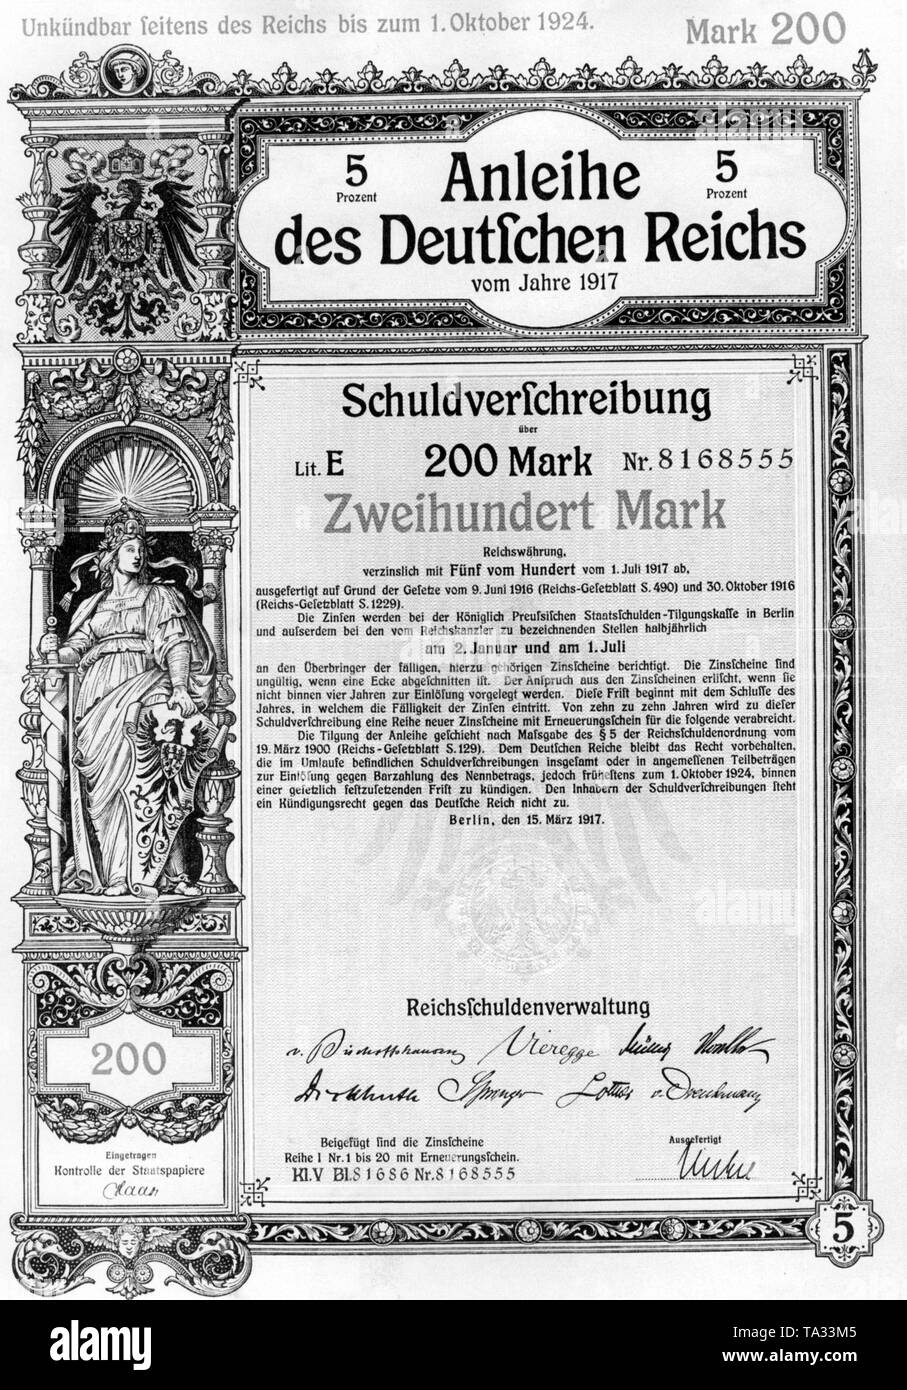 The German bourgeoisie buys war bonds in huge quantities to cover the cost of war during the First World War. Stock Photo